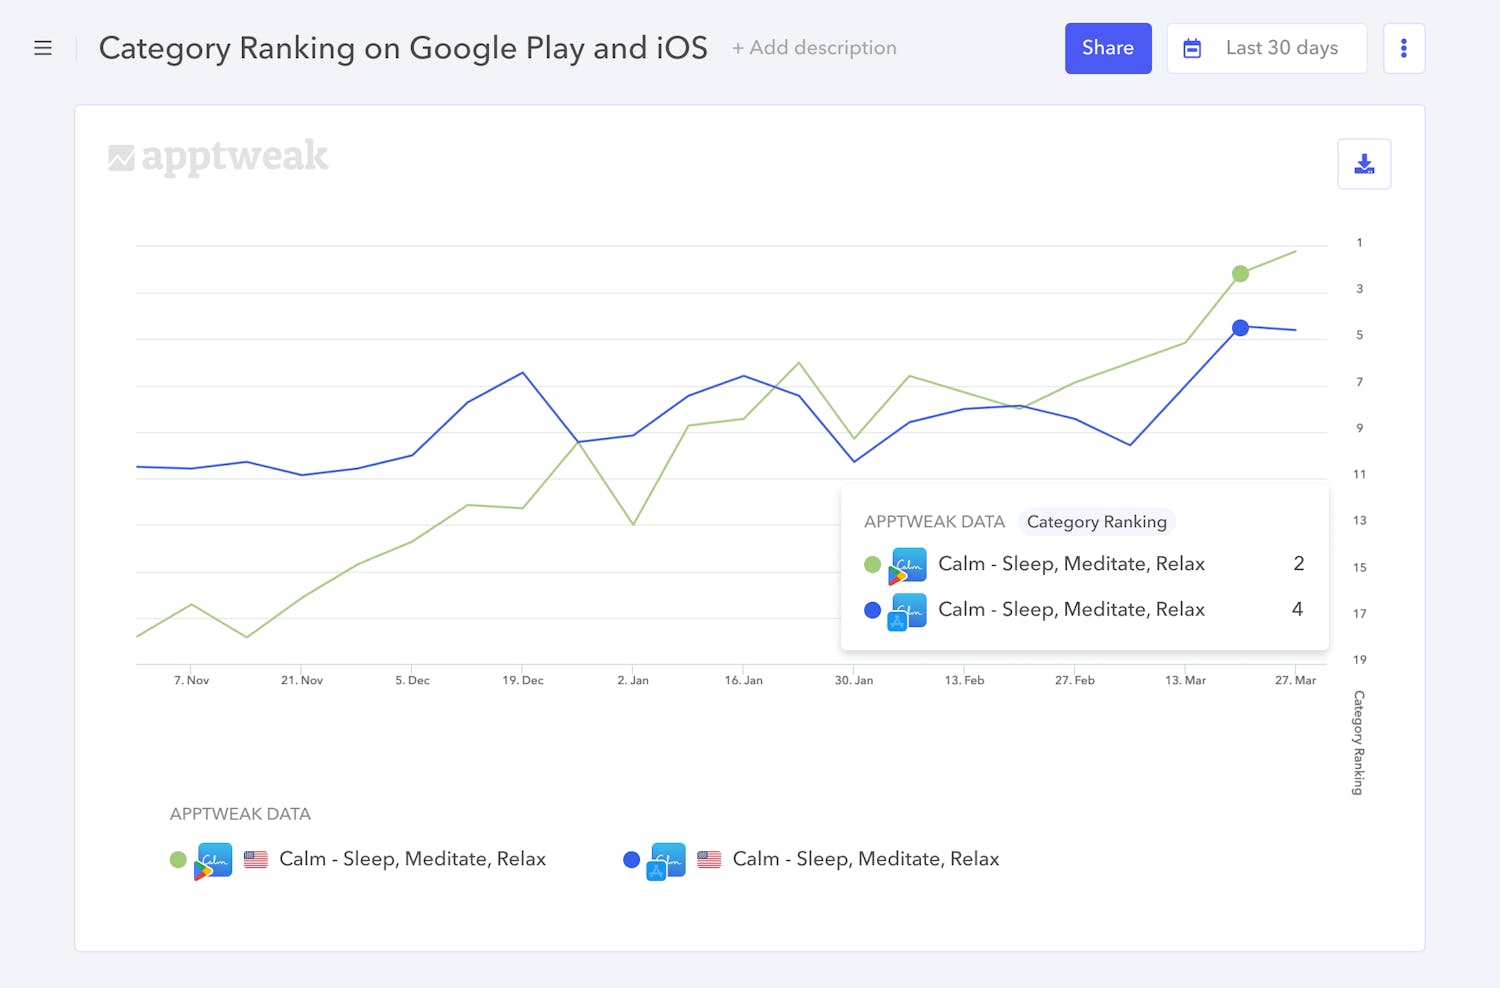 With Reporting Studio, plot app category ranking for multiple devices on the same graph. 